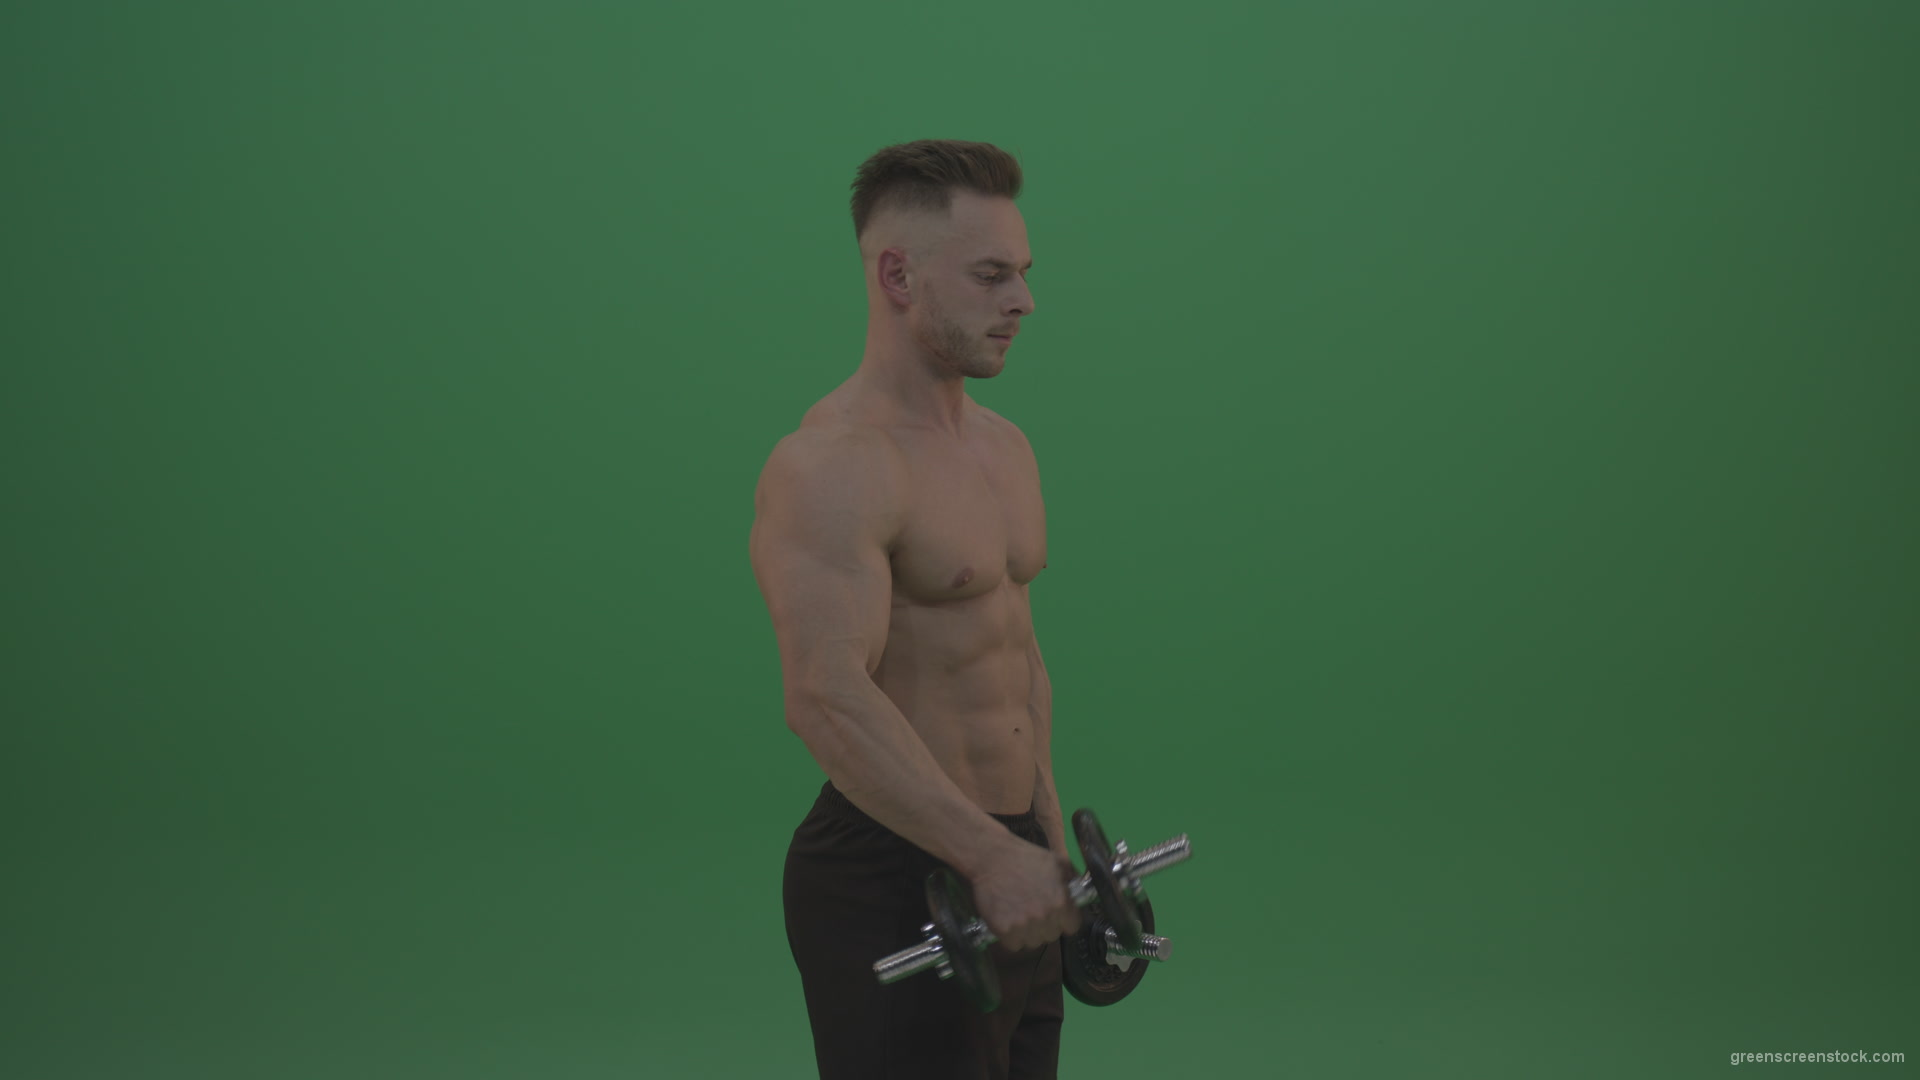 Young_Bodybuilder_Working_Out_Two_Handed_Dumbbell_Push_Ups_Excercise_On_Green_Screen_Wall_Background_007 Green Screen Stock